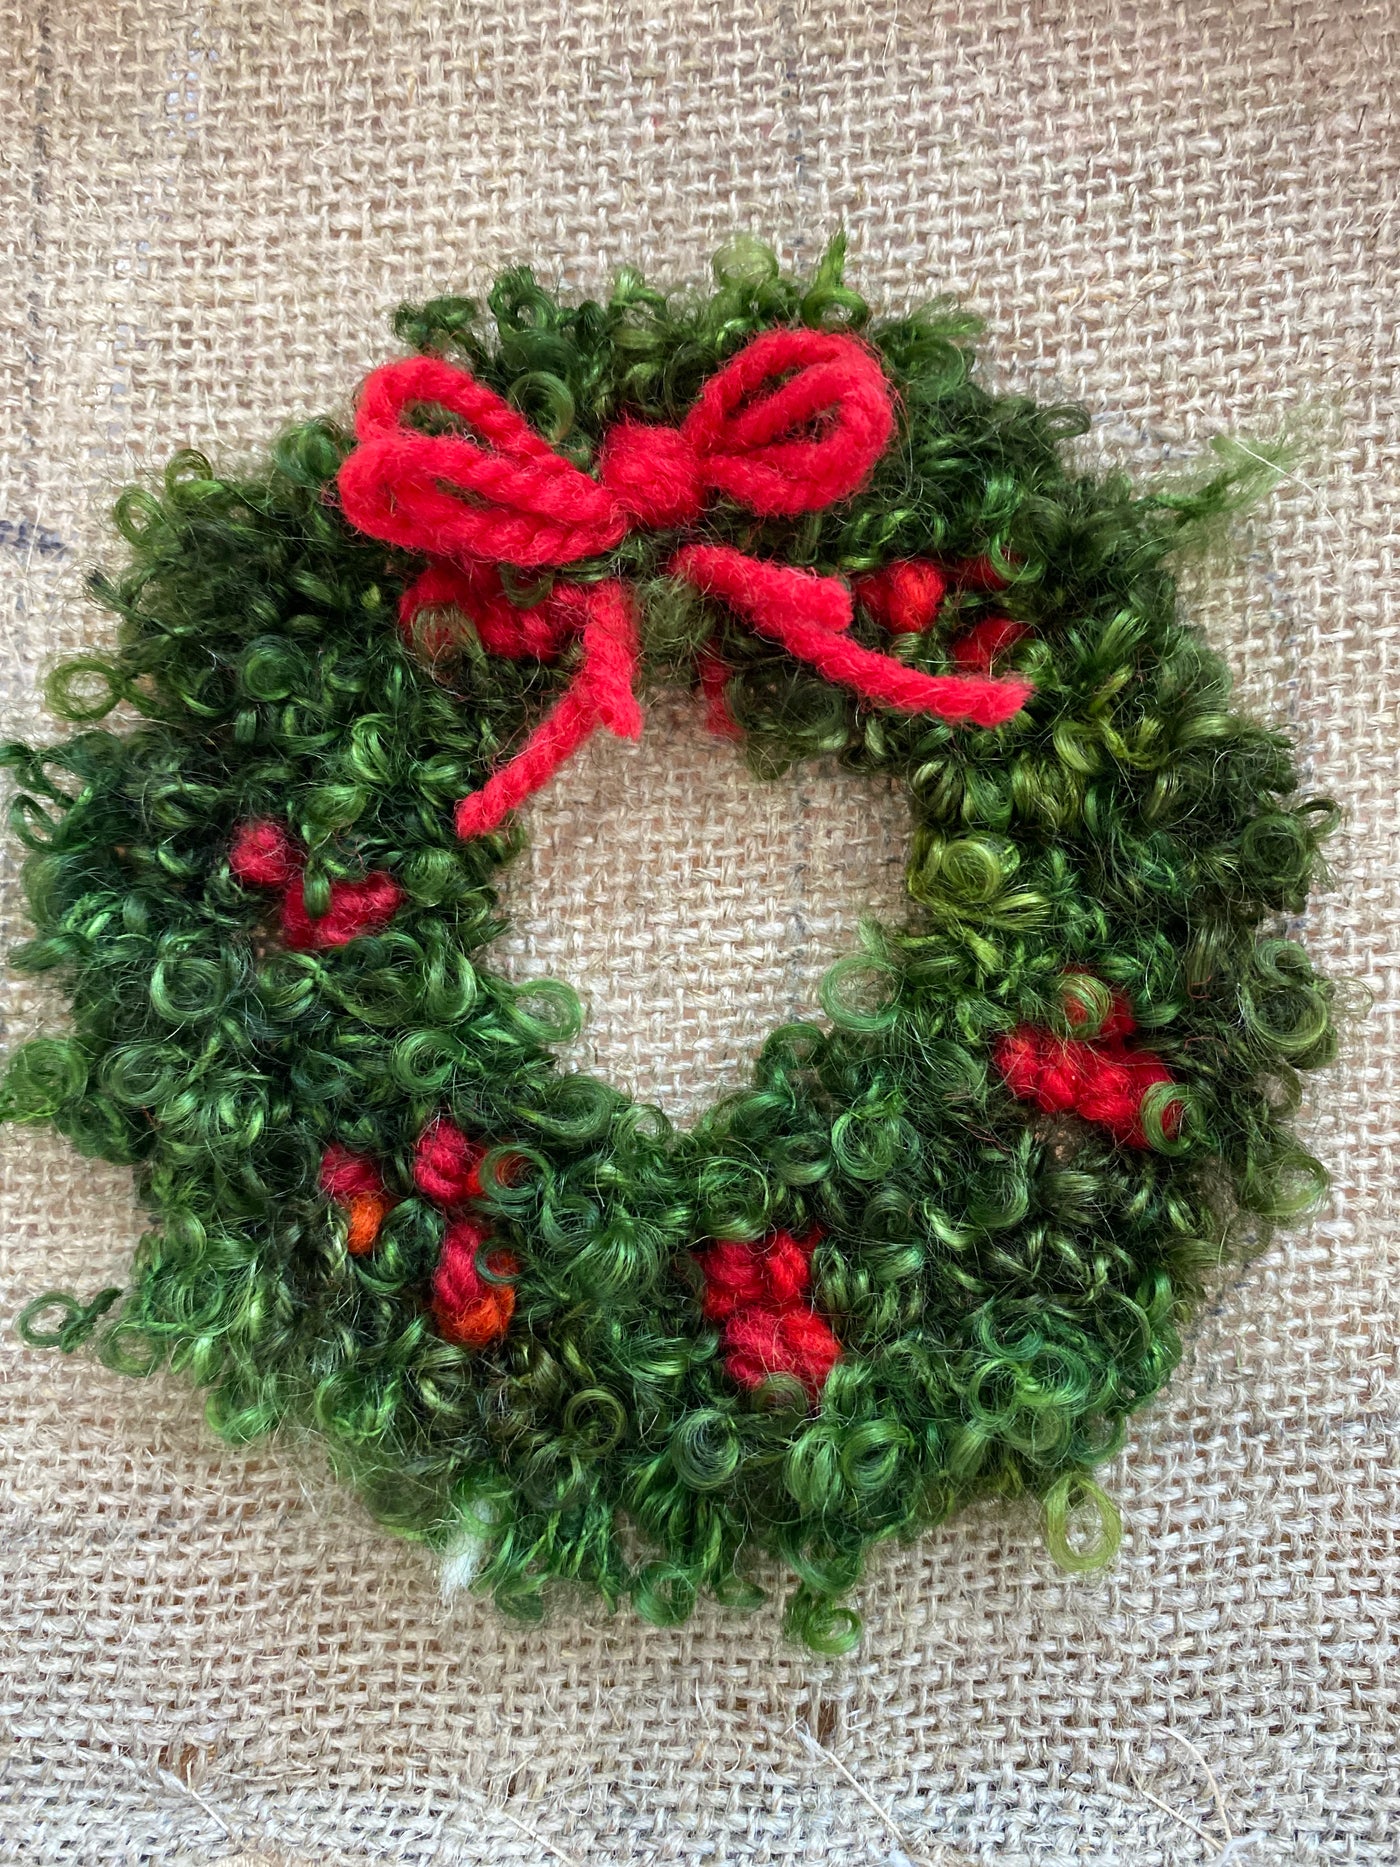 Episode 57 Planning a rug and Hooking a Little wreath